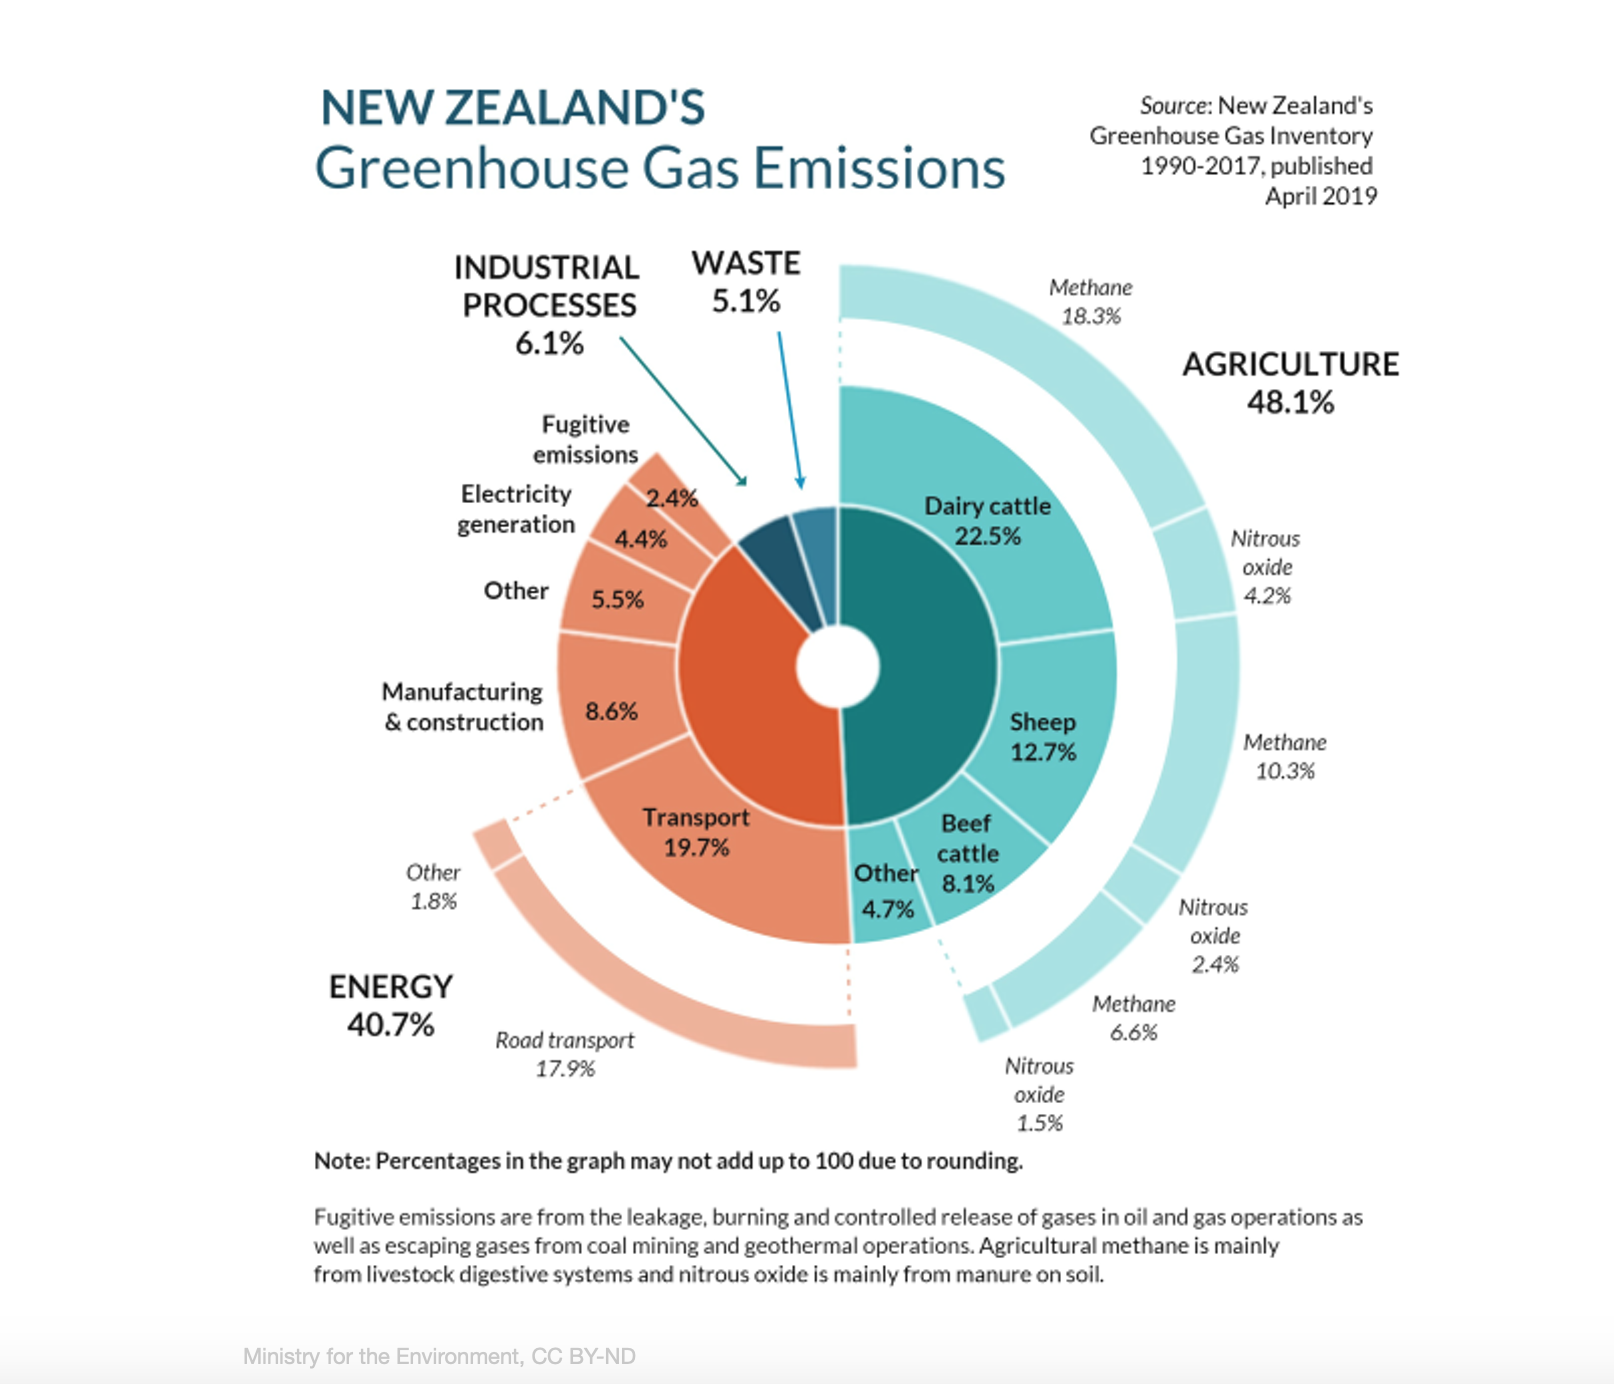 New Zealand's greenhouse gas emissions by sector.